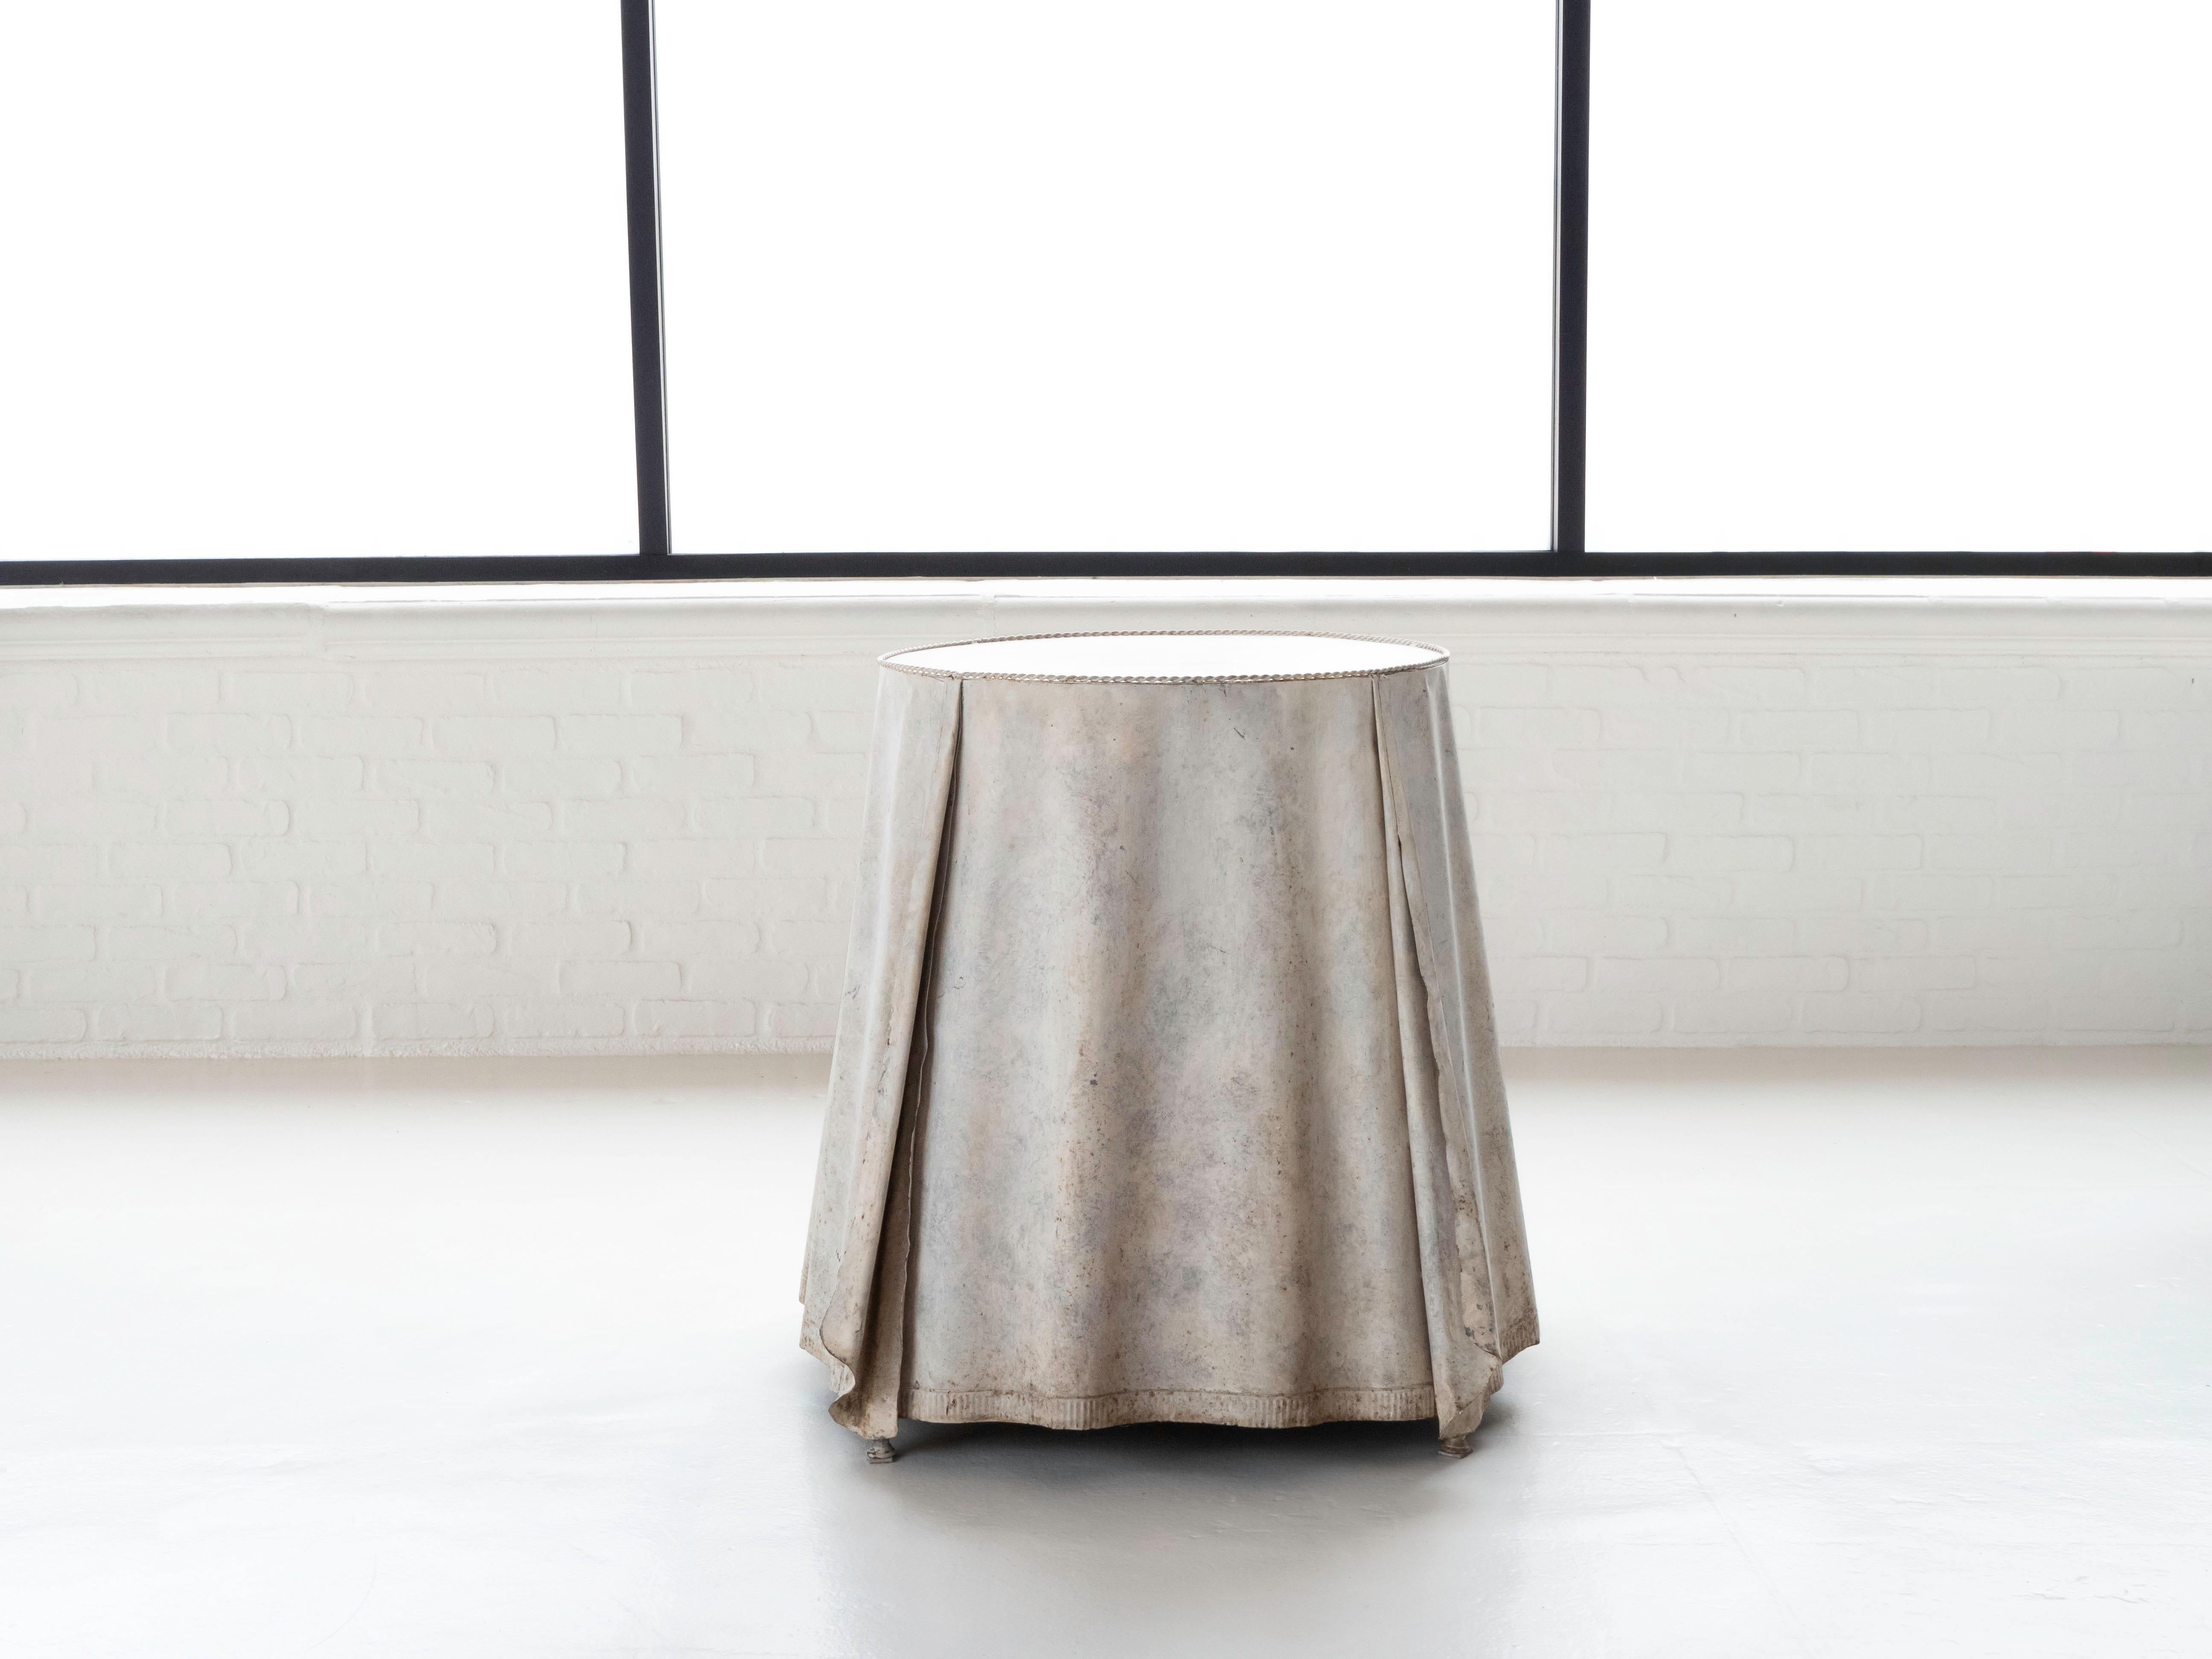 Stunning galvanized steel draped trompe l'oeil occasional table. Made in Italy, circa 1950's/1960's. The table shows oxidation from age and use. The table is structurally sound and retains all original hardware and patina. Very reminiscent of